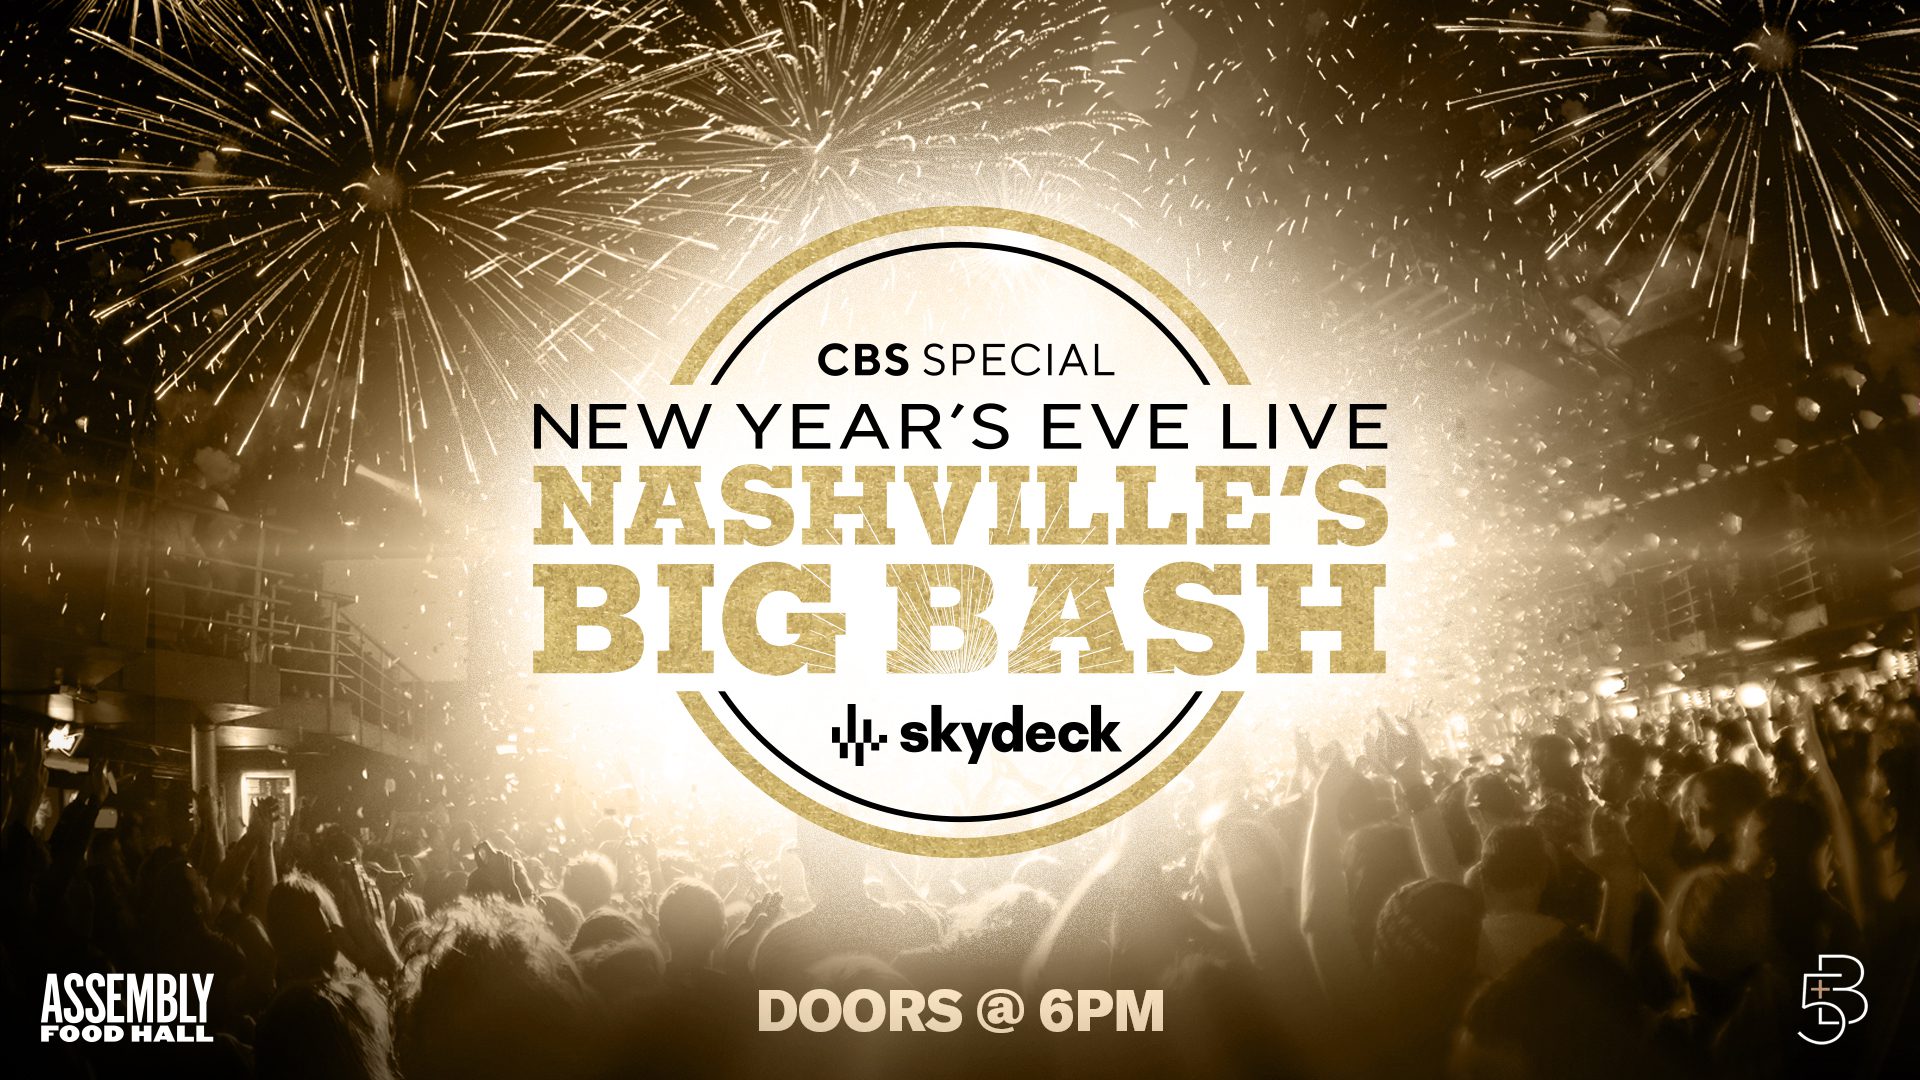 New Years Eve Event in Nashville - CBS New Year’s Eve Live- Nashville’s Big Bash.